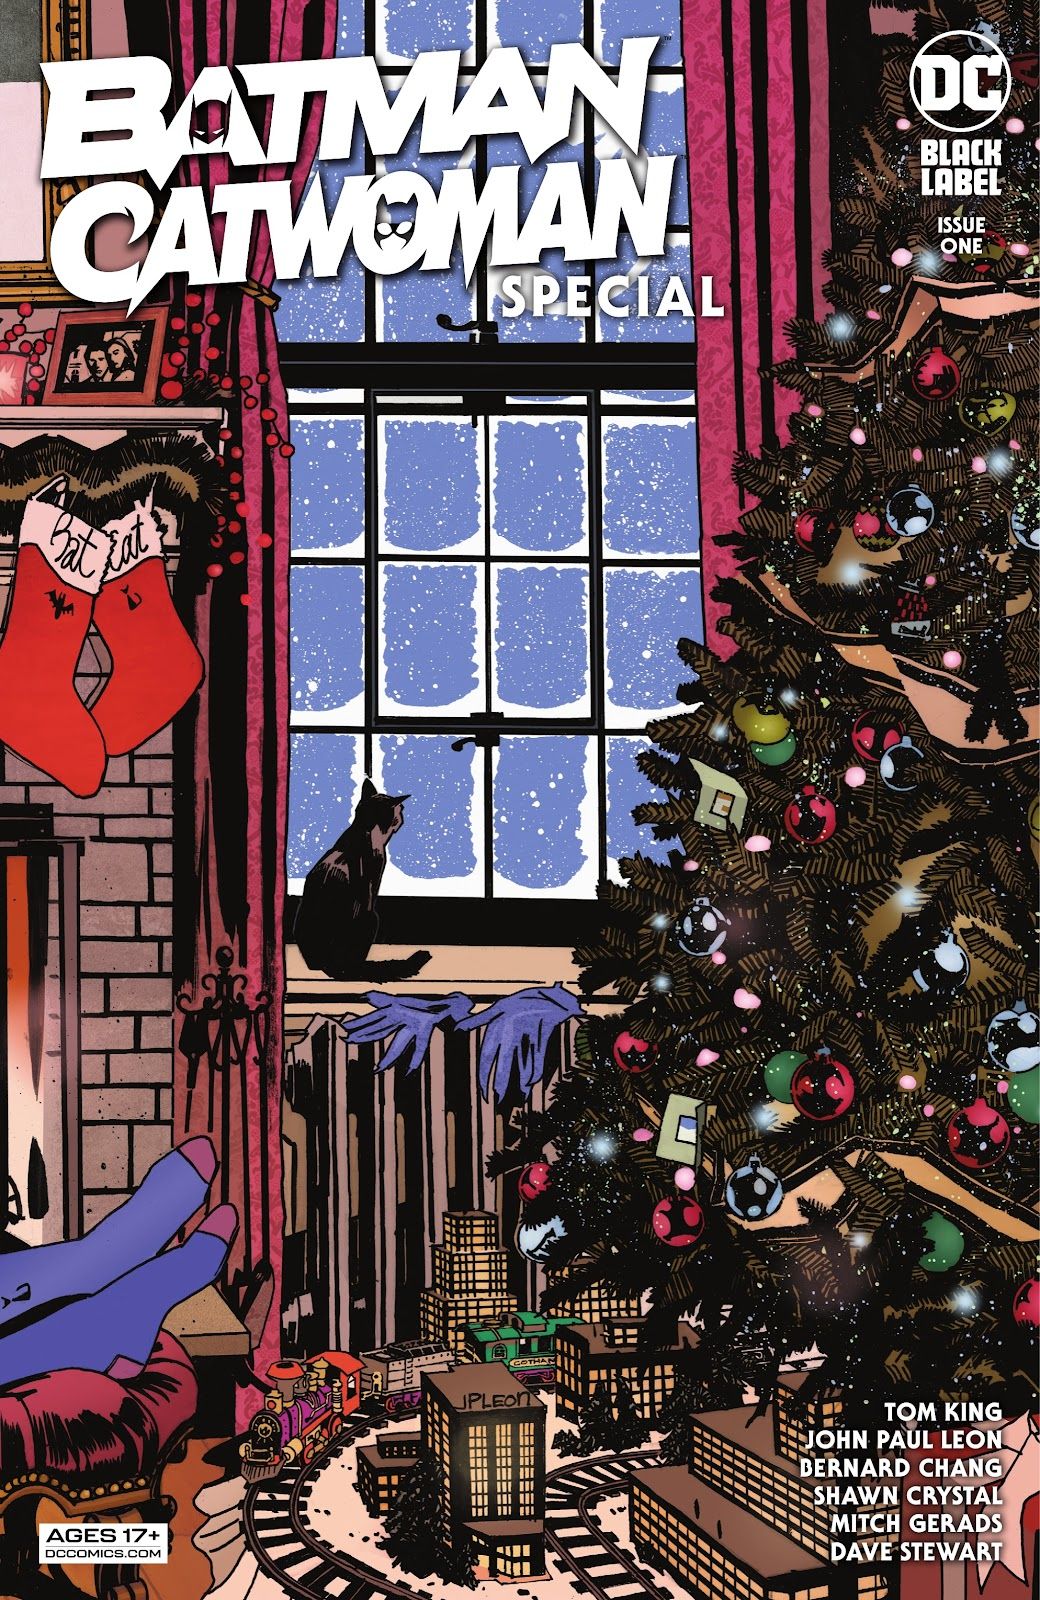 Cover of Batman / Catwoman Special #1